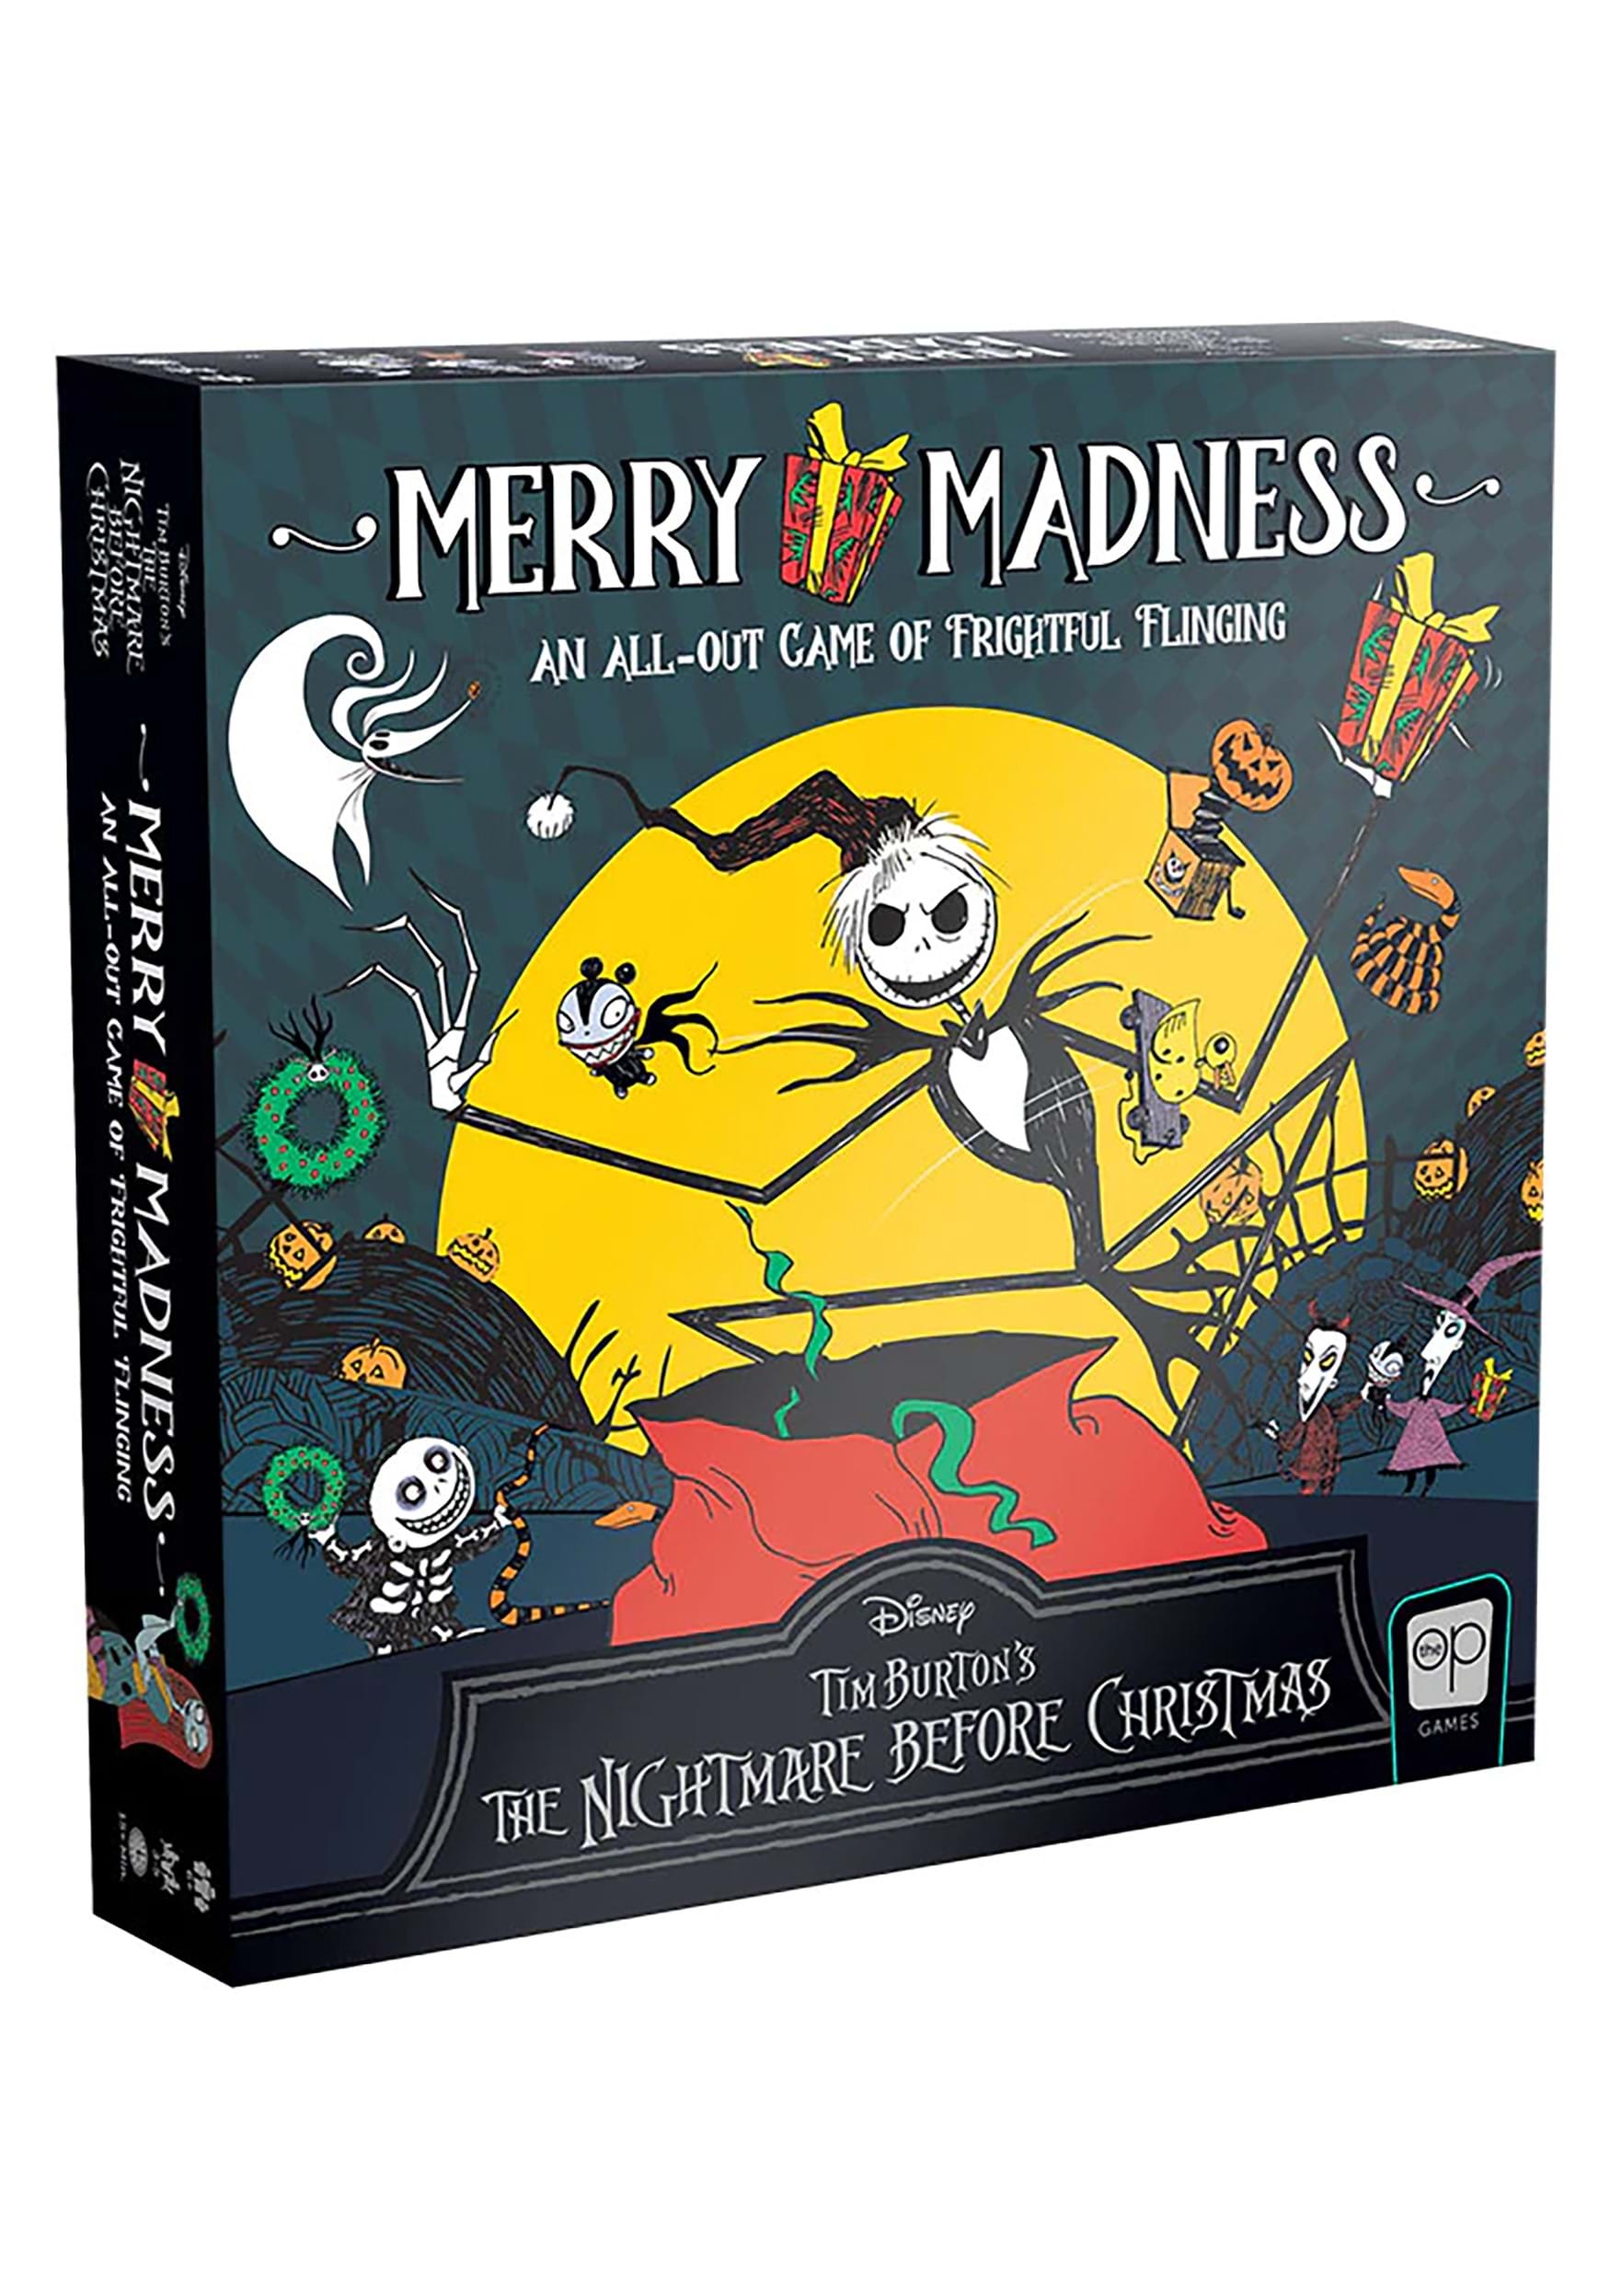 Disney Nightmare Before Christmas Merry Madness Game